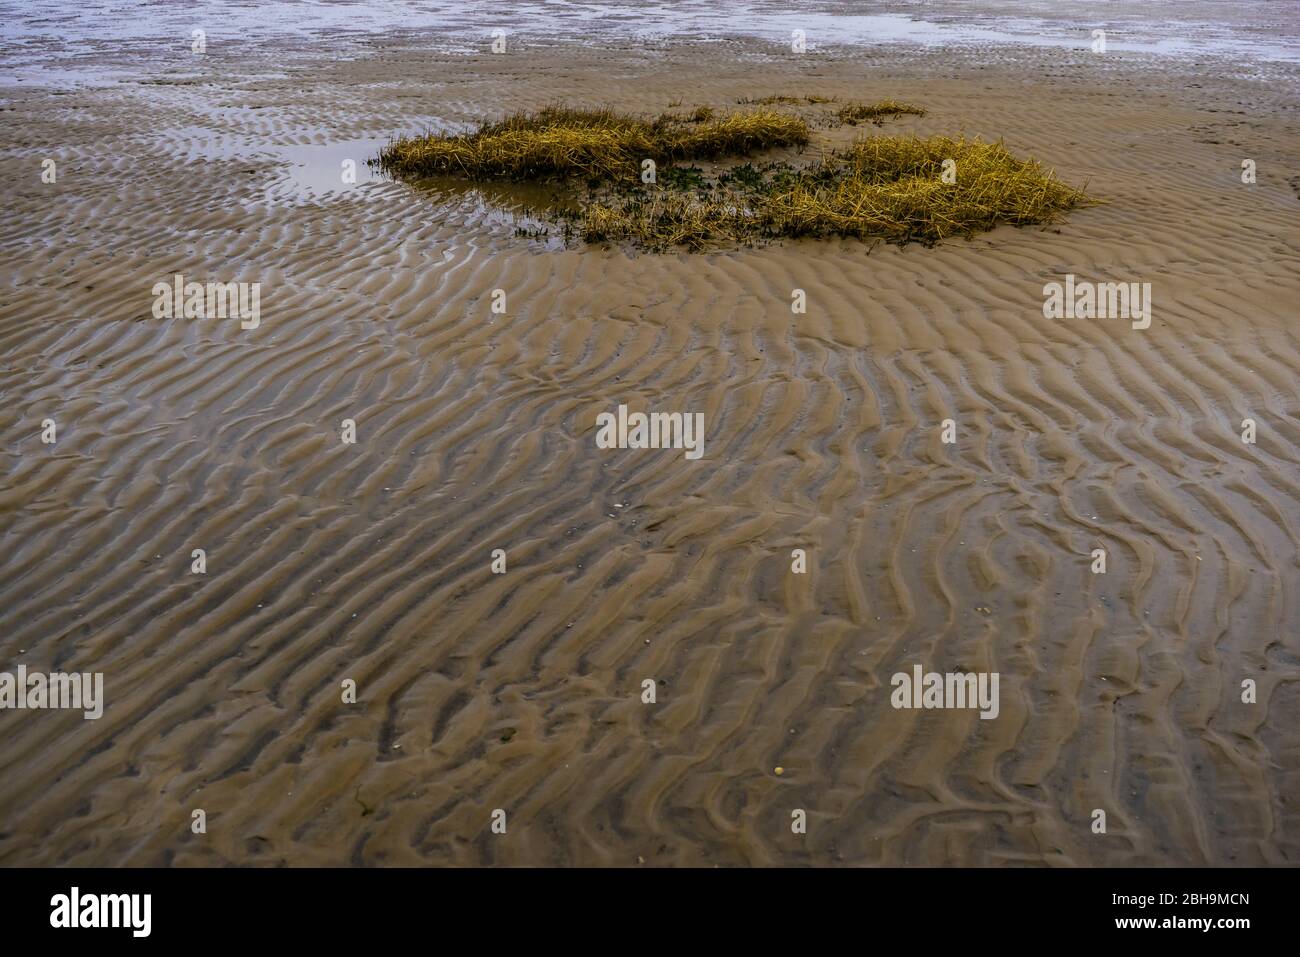 The sea floor at low tide in the north sea with salt grass Stock Photo